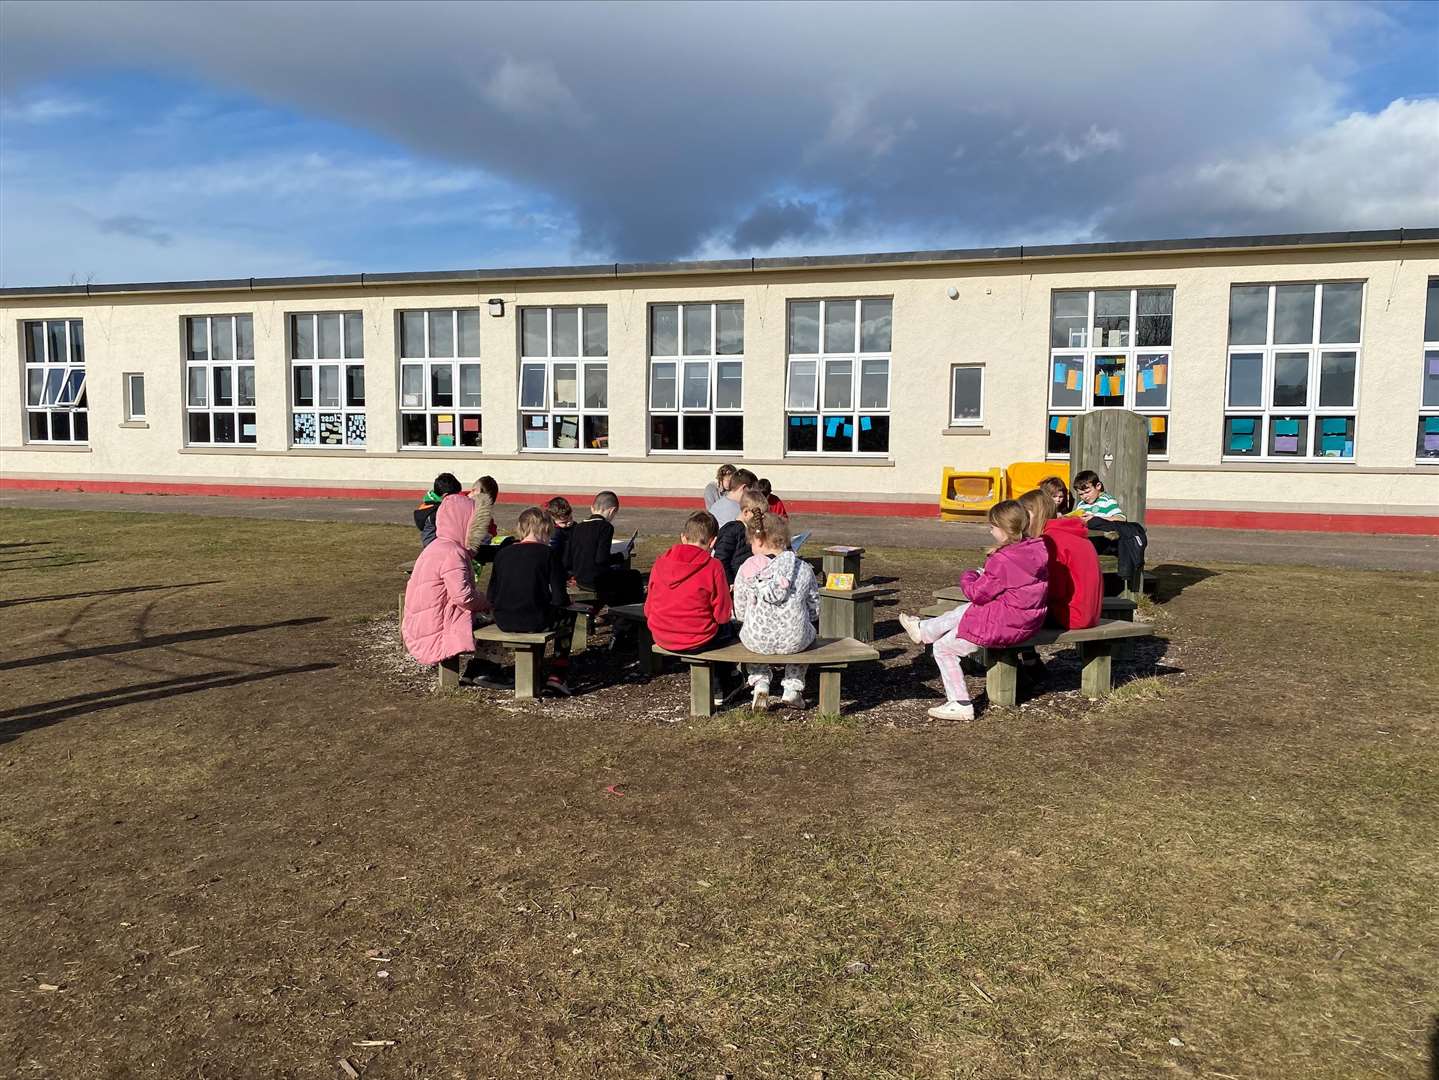 The whole school took part in reading outside.